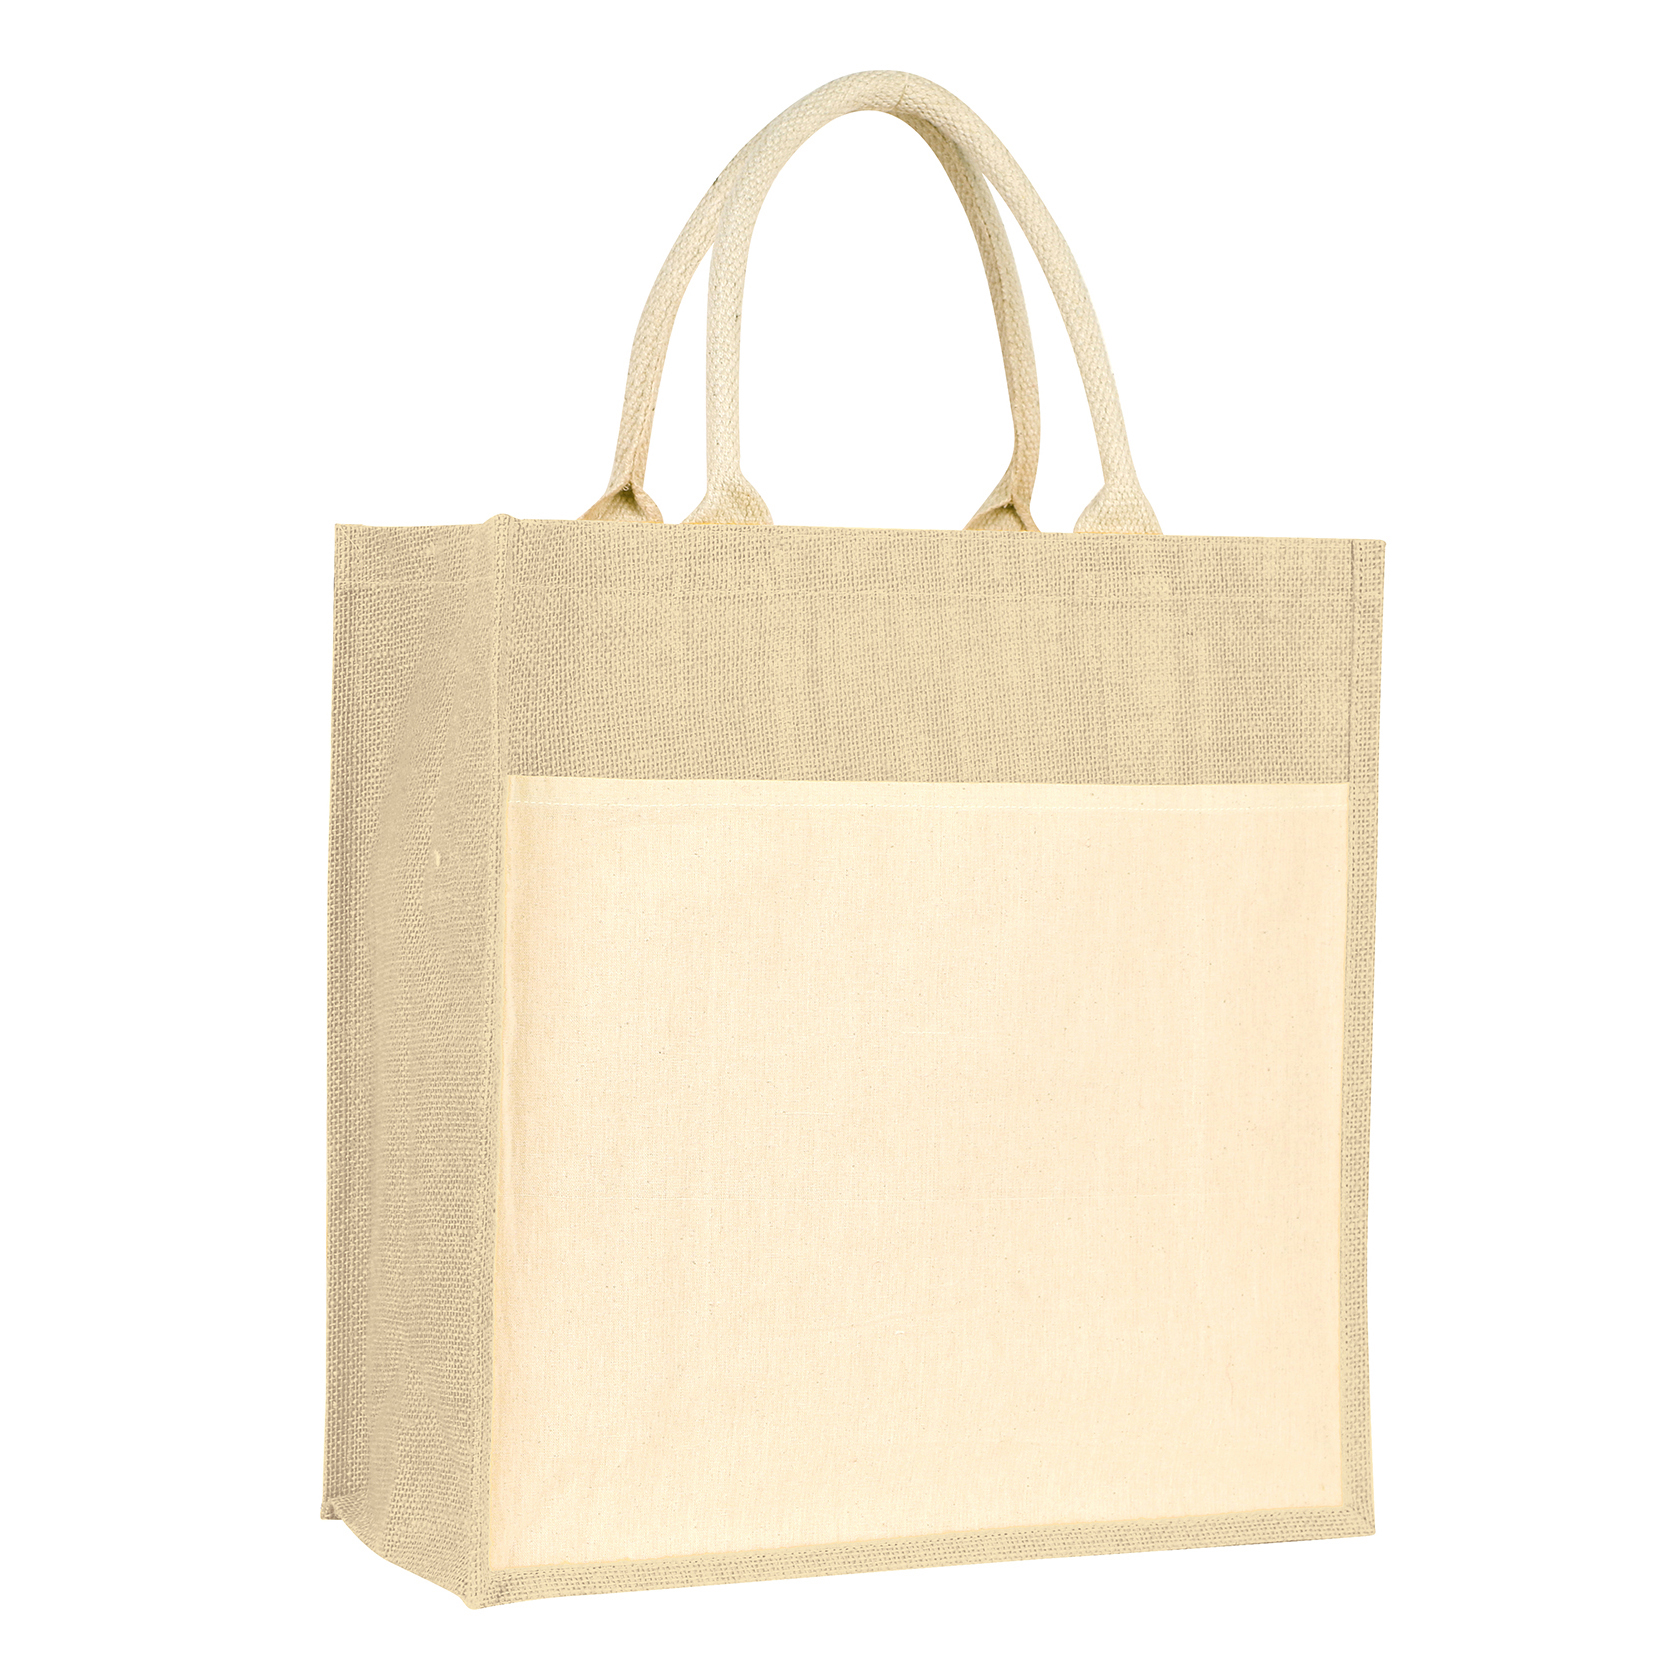 Jute Bag Archives - Page 2 of 2 - Gift Idea